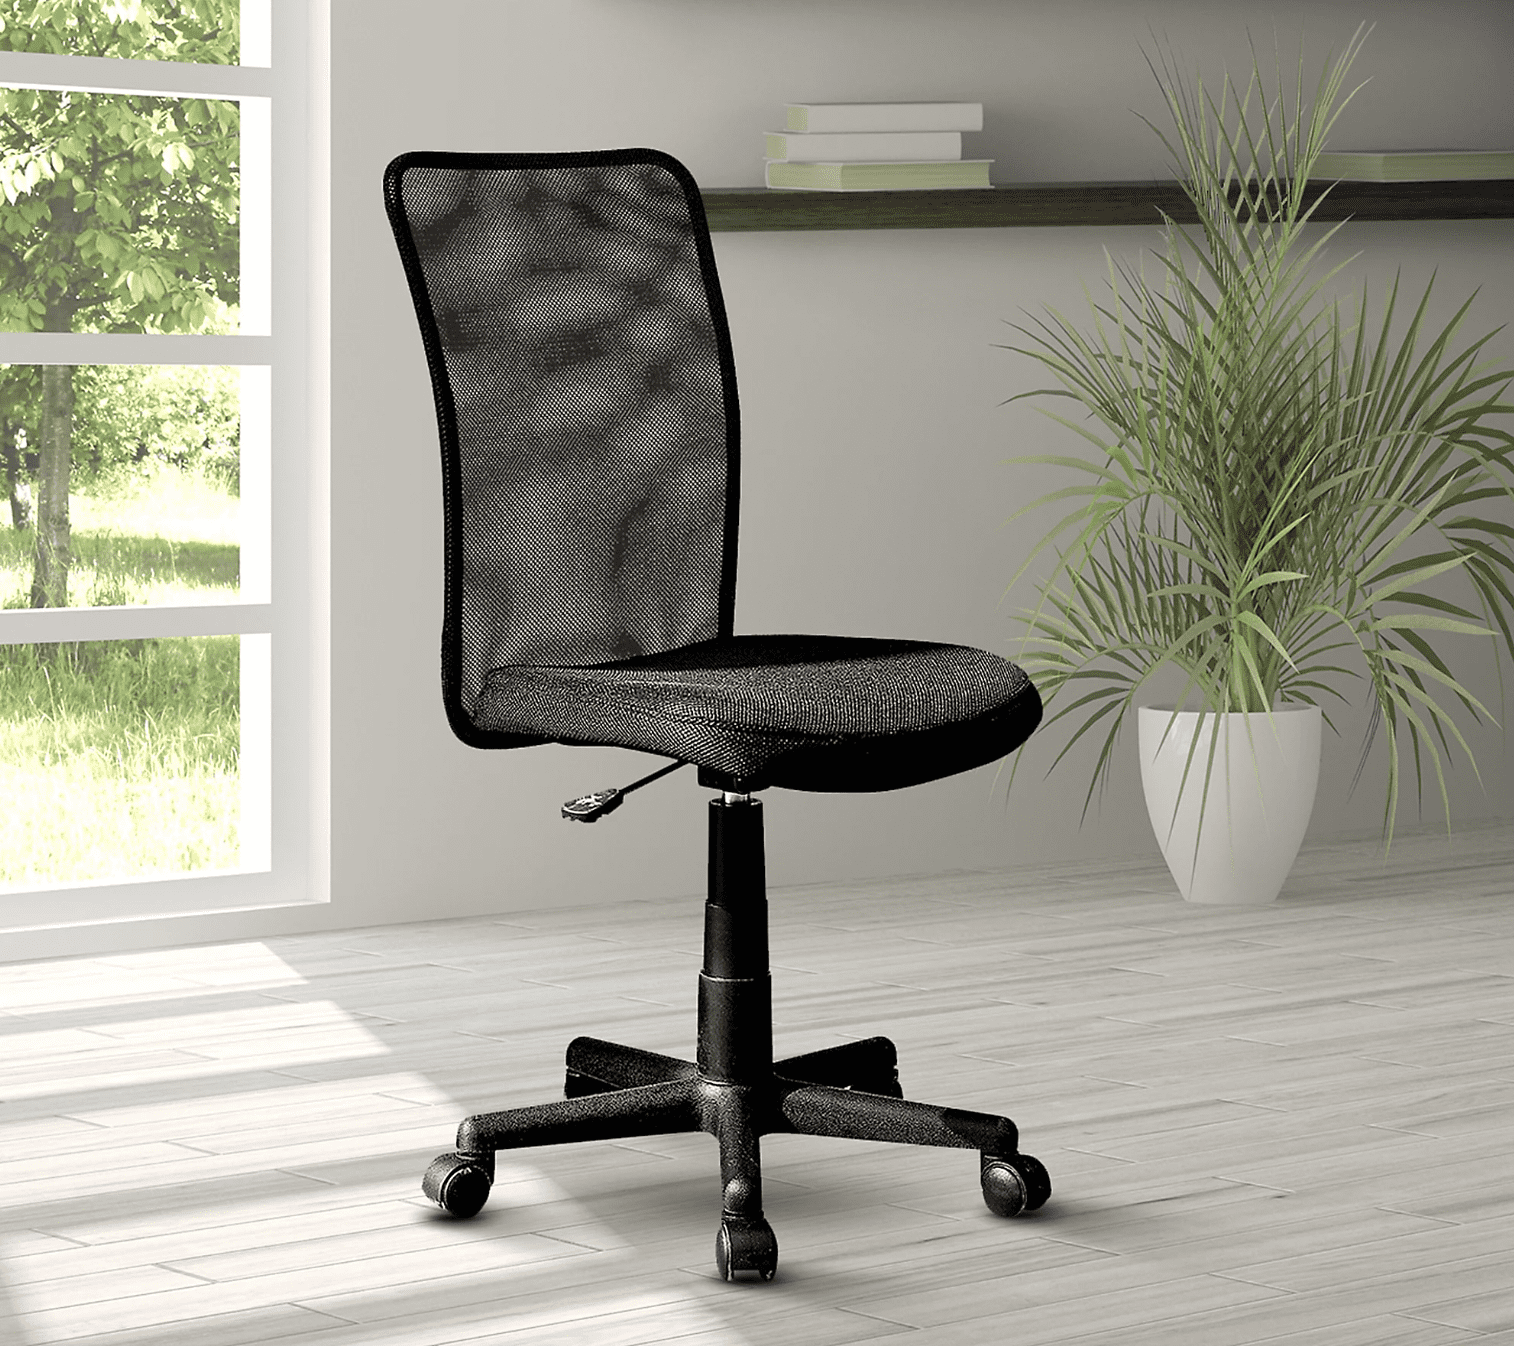 Hunting for a decent but inexpensive office chair… suggestions